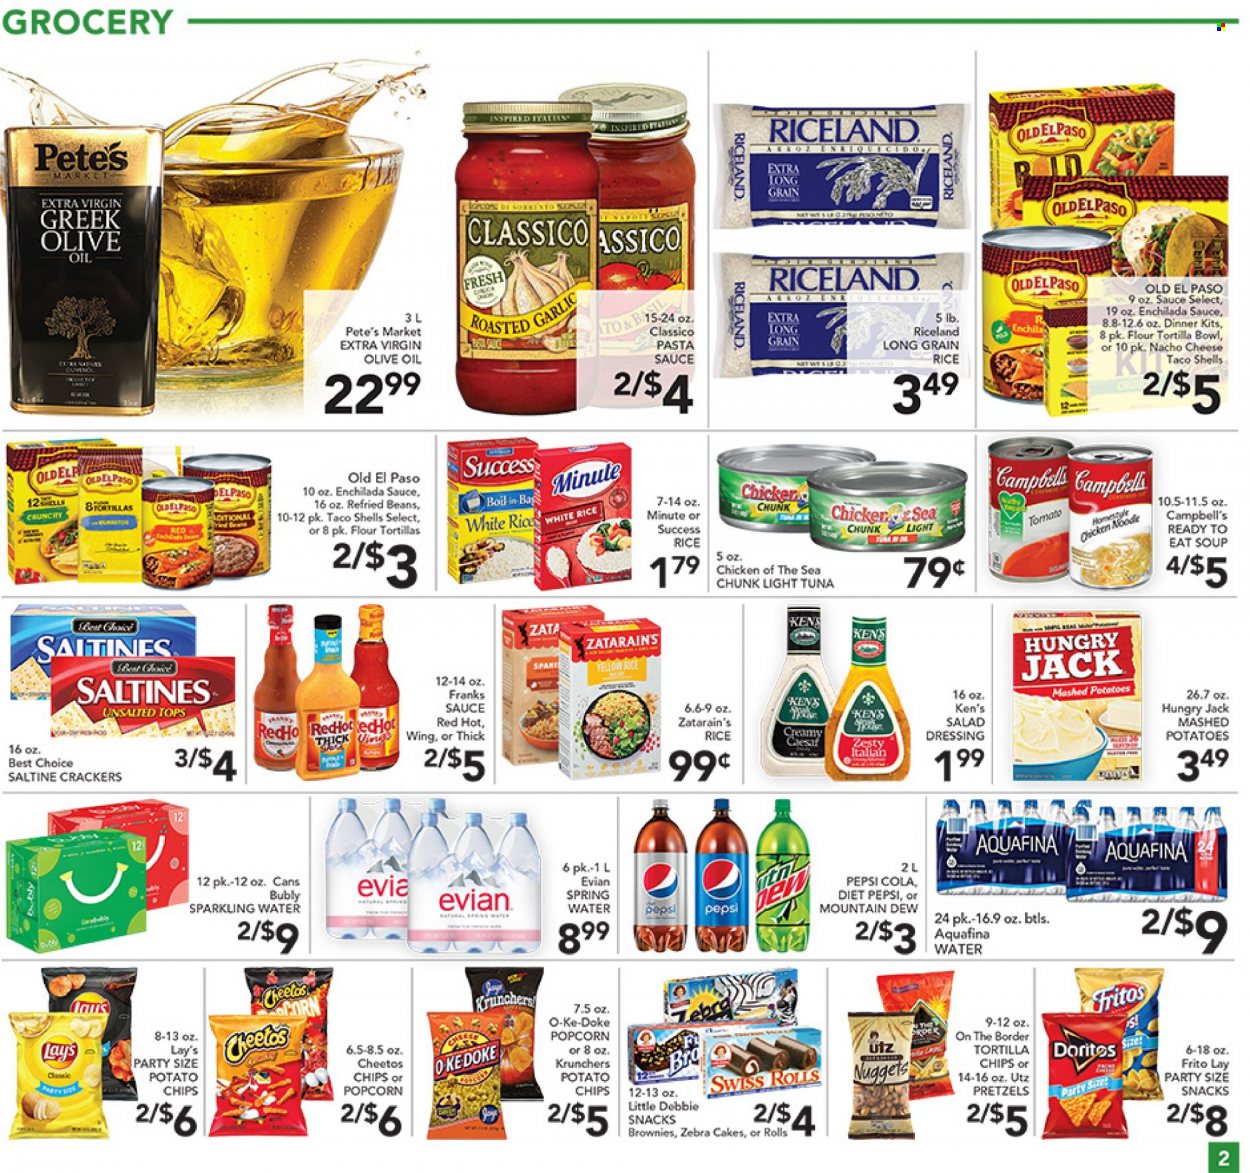 thumbnail - Pete's Fresh Market Flyer - 09/15/2021 - 09/21/2021 - Sales products - pretzels, cake, Old El Paso, flour tortillas, corn, garlic, tuna, Campbell's, mashed potatoes, pasta sauce, soup, nuggets, dinner kit, snack, crackers, Doritos, Fritos, tortilla chips, potato chips, Cheetos, chips, Lay’s, popcorn, enchilada sauce, refried beans, light tuna, Chicken of the Sea, rice, white rice, long grain rice, salad dressing, dressing, Classico, extra virgin olive oil, olive oil, oil, Mountain Dew, Pepsi, Diet Pepsi, Aquafina, spring water, sparkling water, Evian. Page 2.